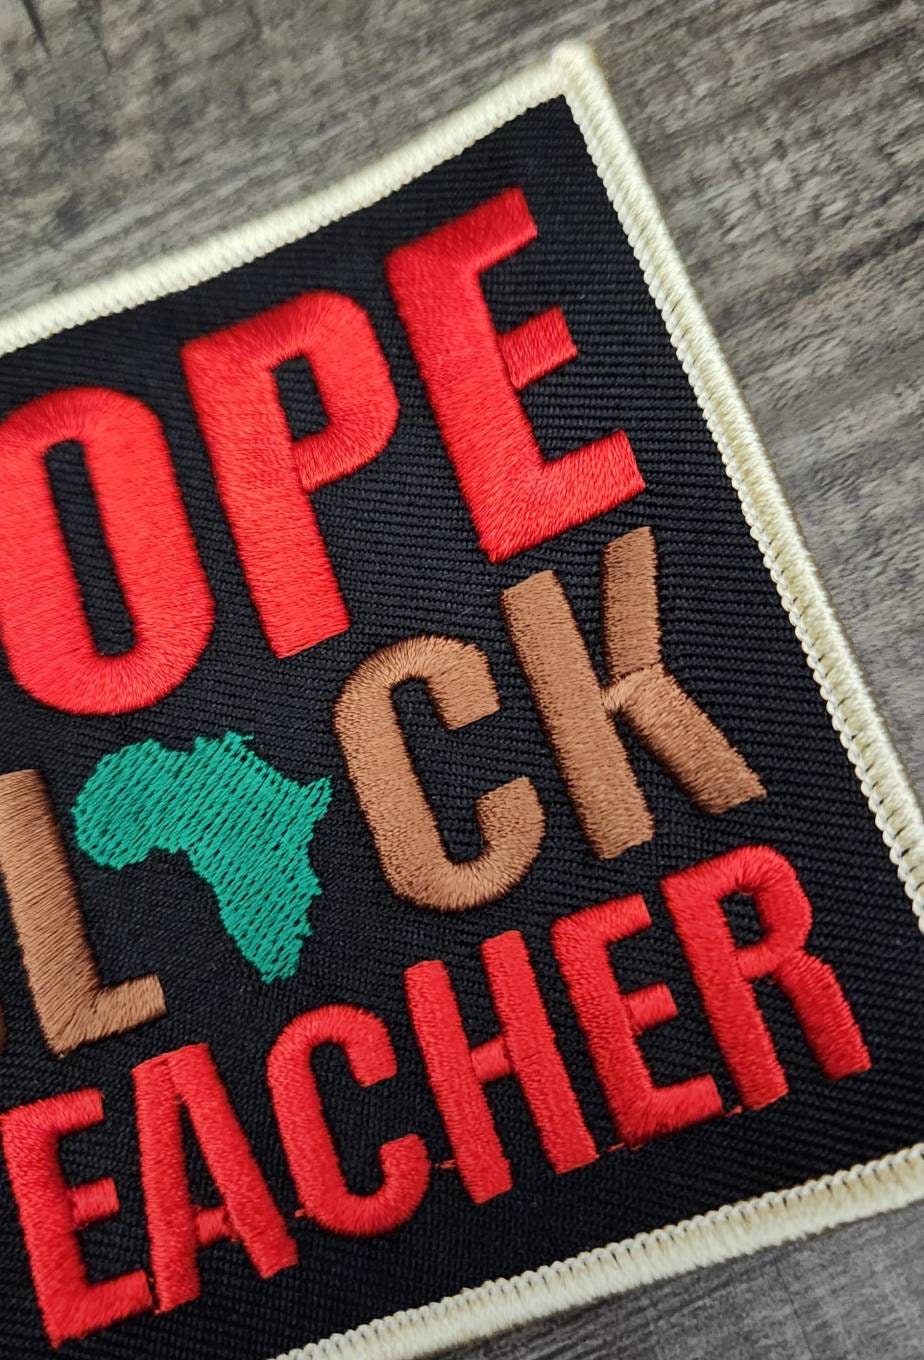 New, 1-pc "Dope Black Teacher" Teacher's Appreciation Gift | Iron-on Embroidery Patch | Size 3.65" Black Teacher Patch for Jackets